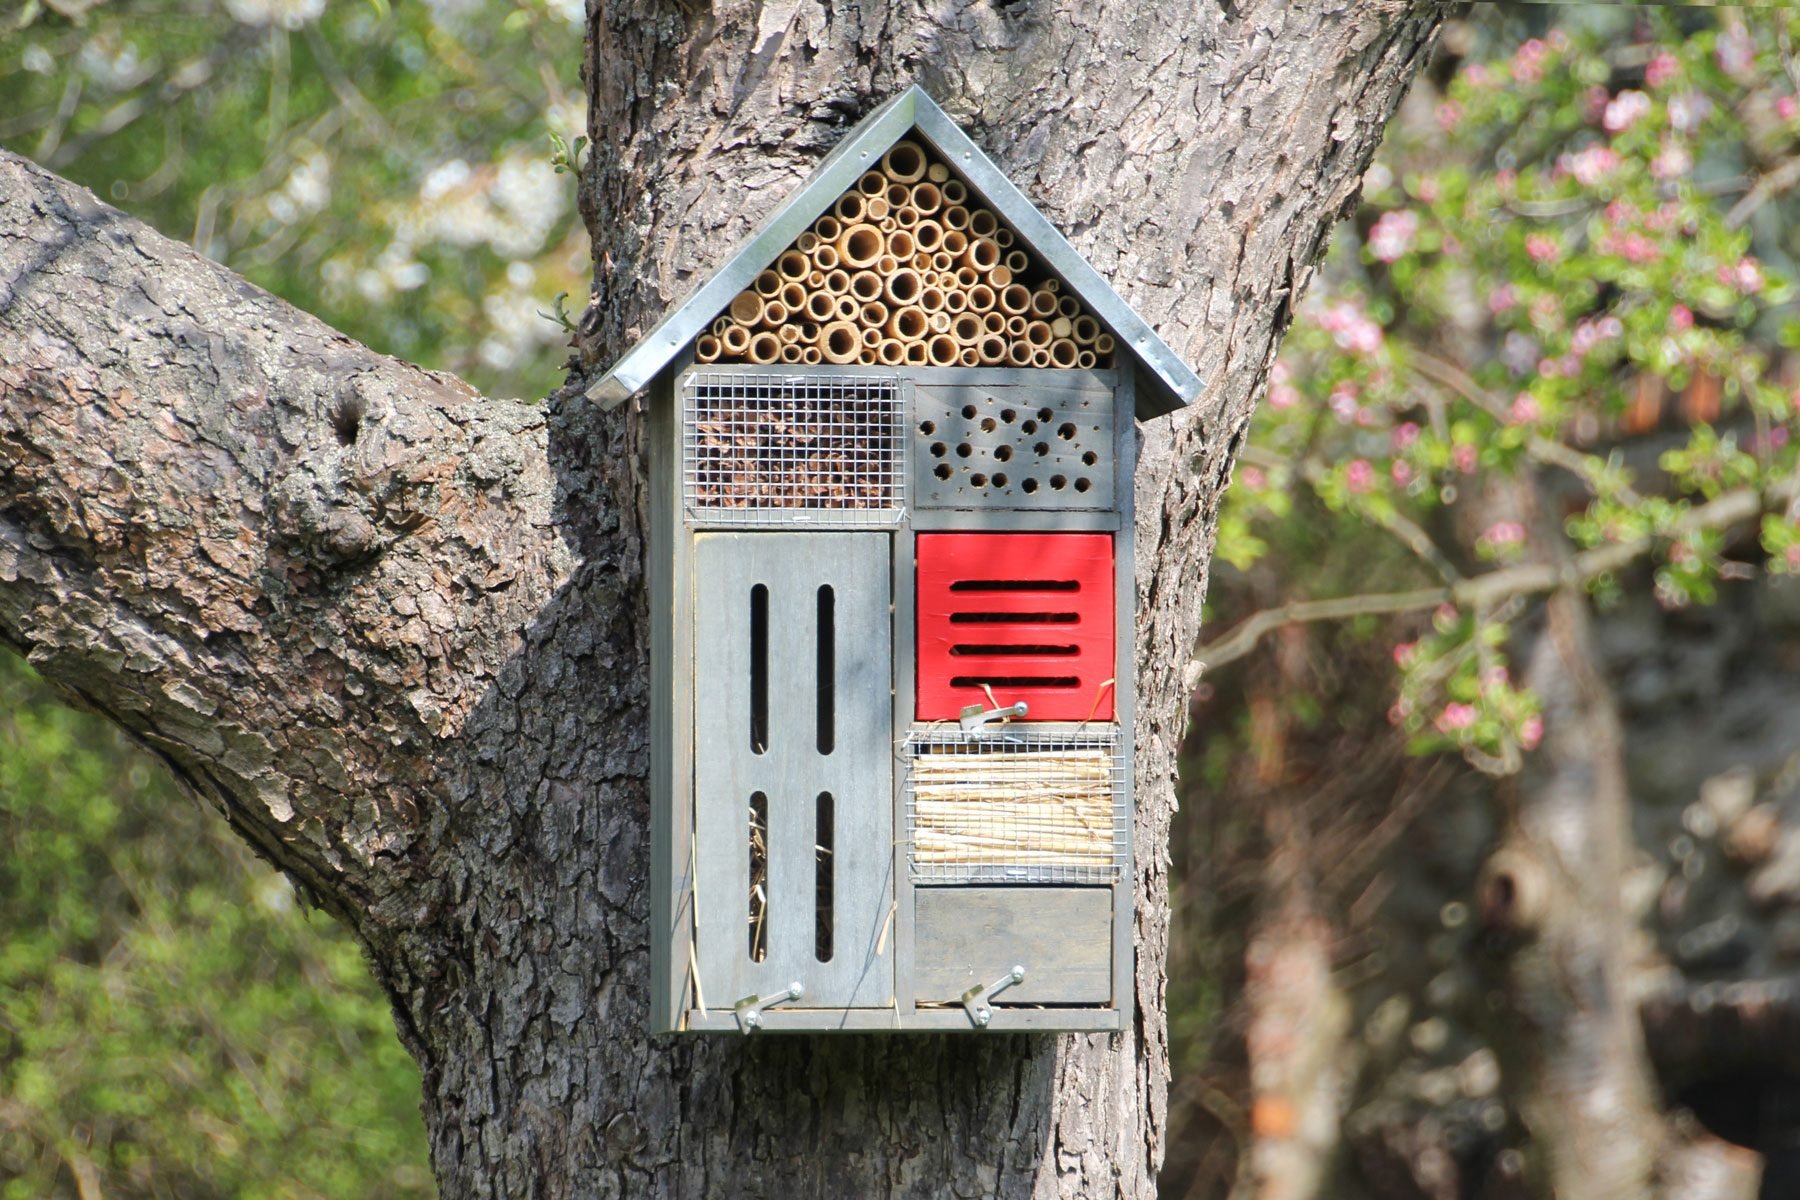 Insect Hotel in a fruit garden